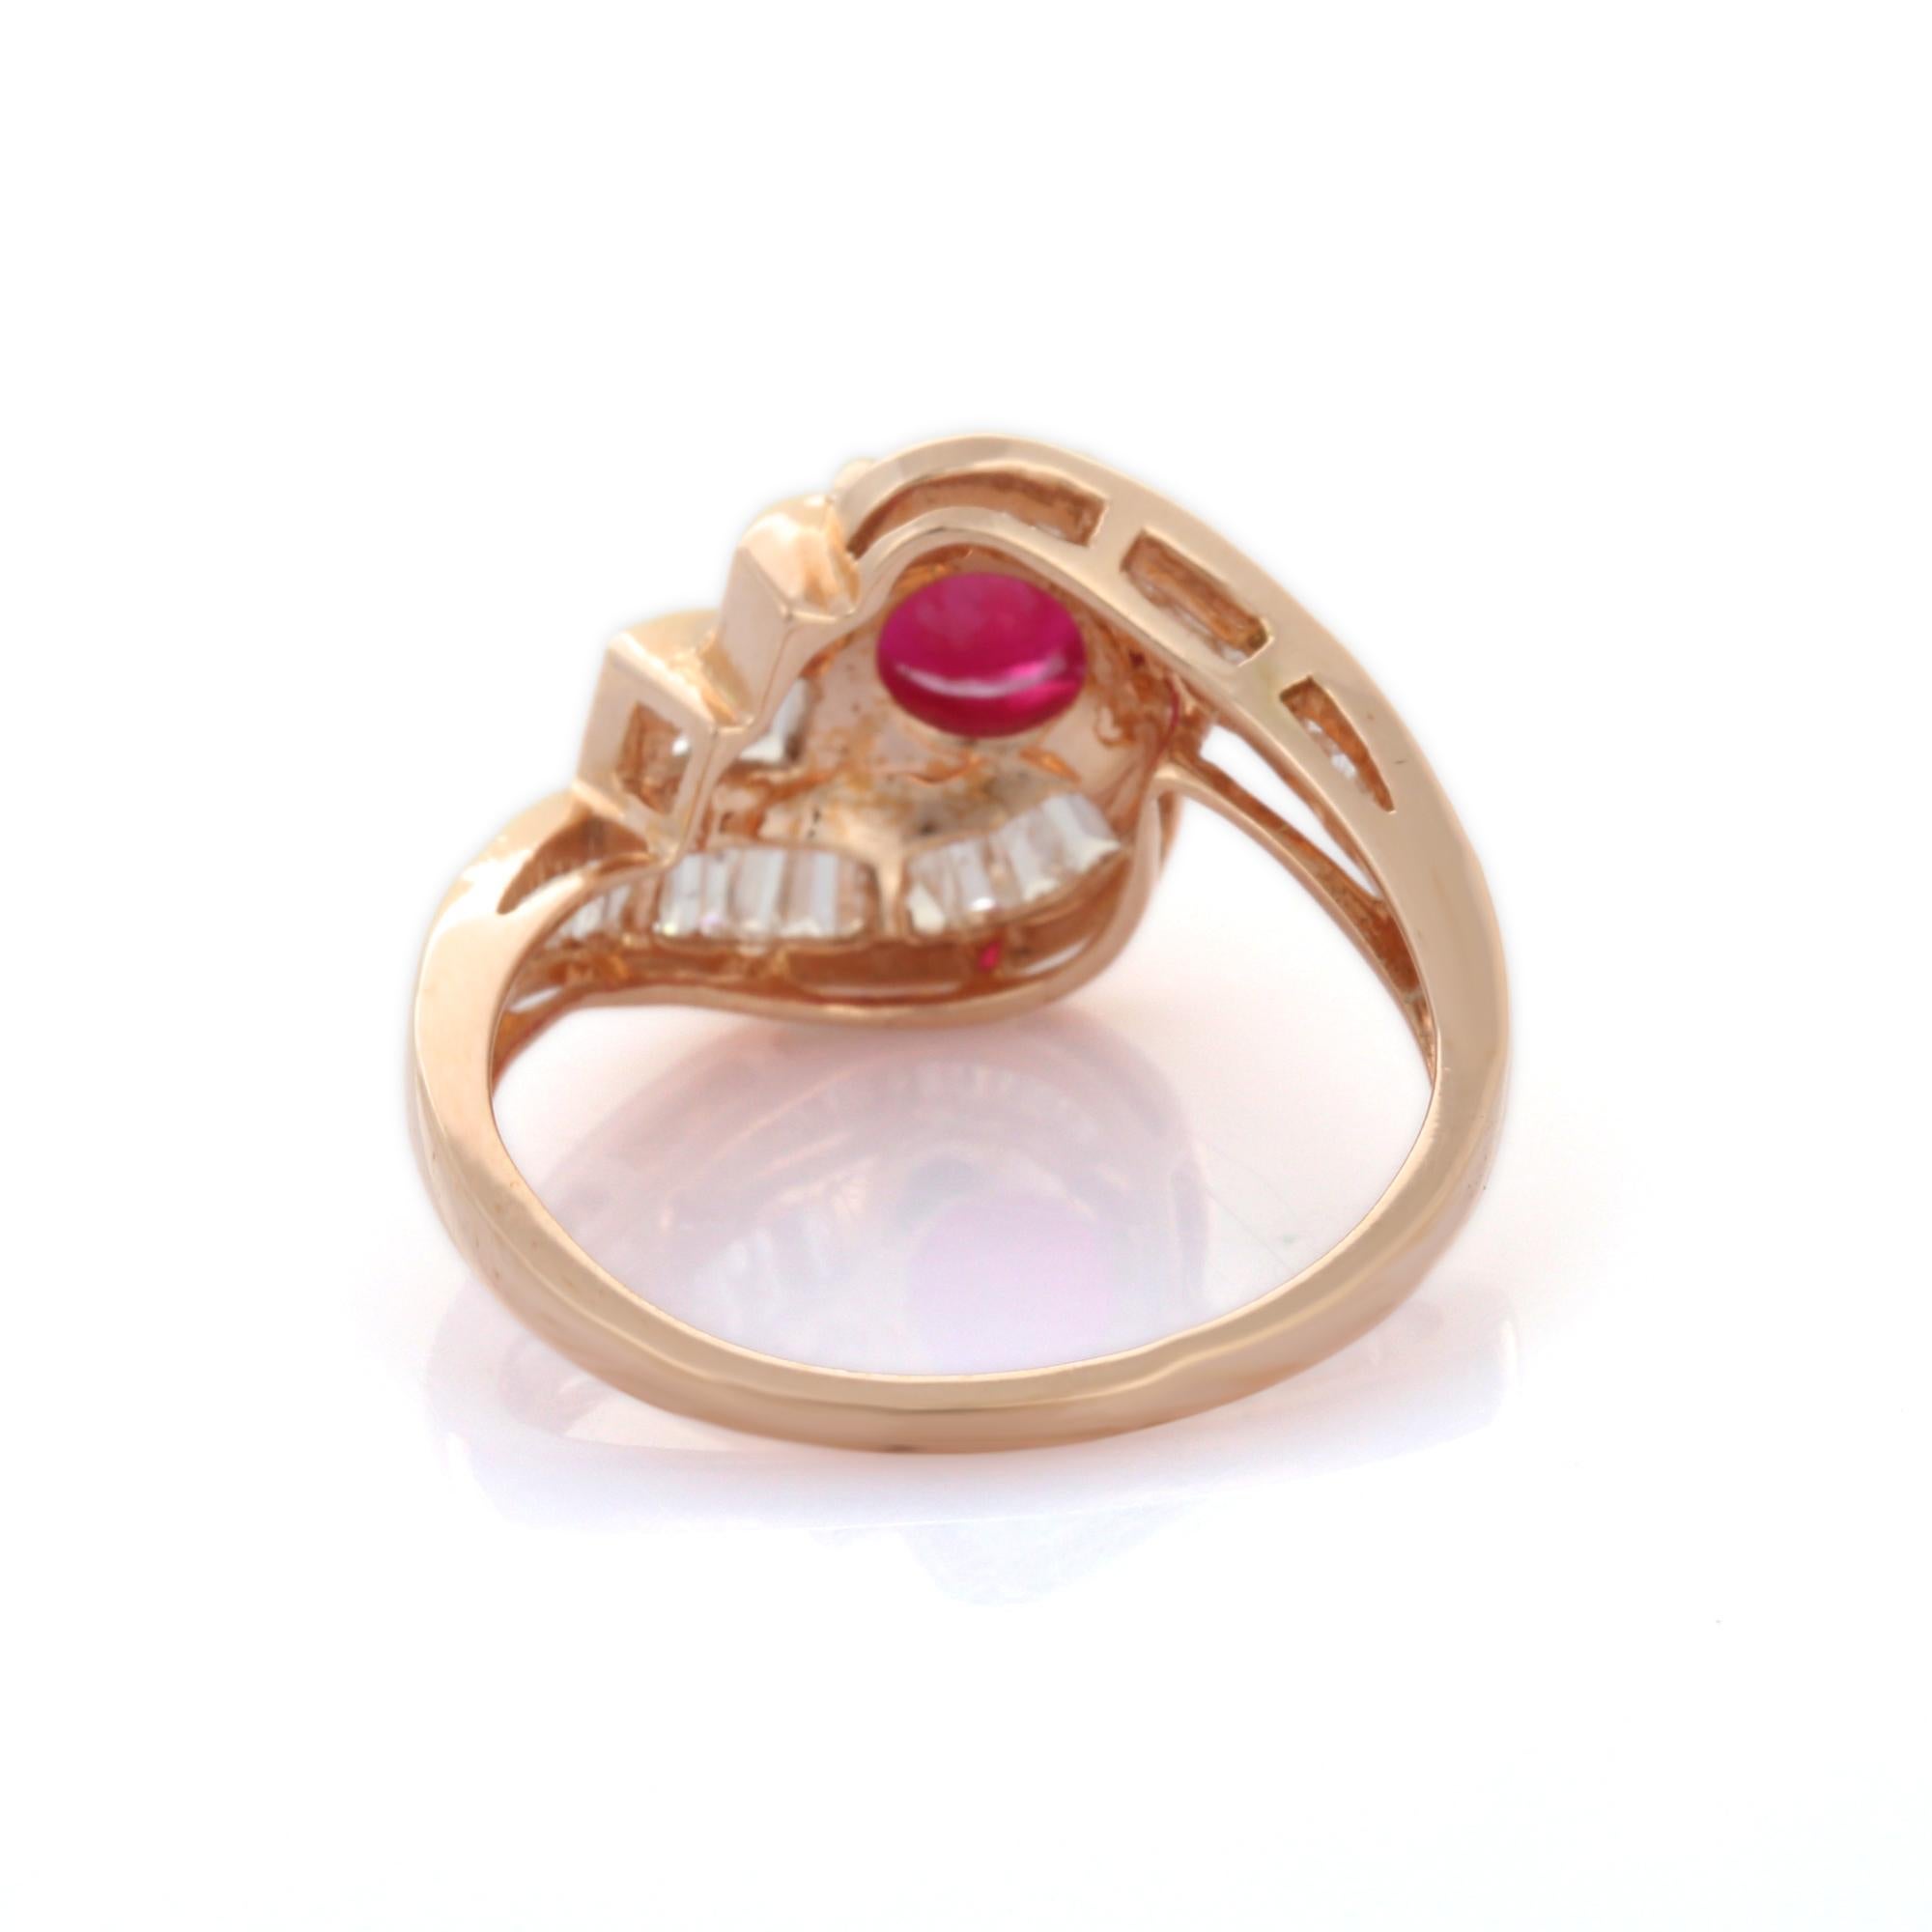 For Sale:  14K Rose Gold Baguette Cut Diamond and Ruby Ring 3